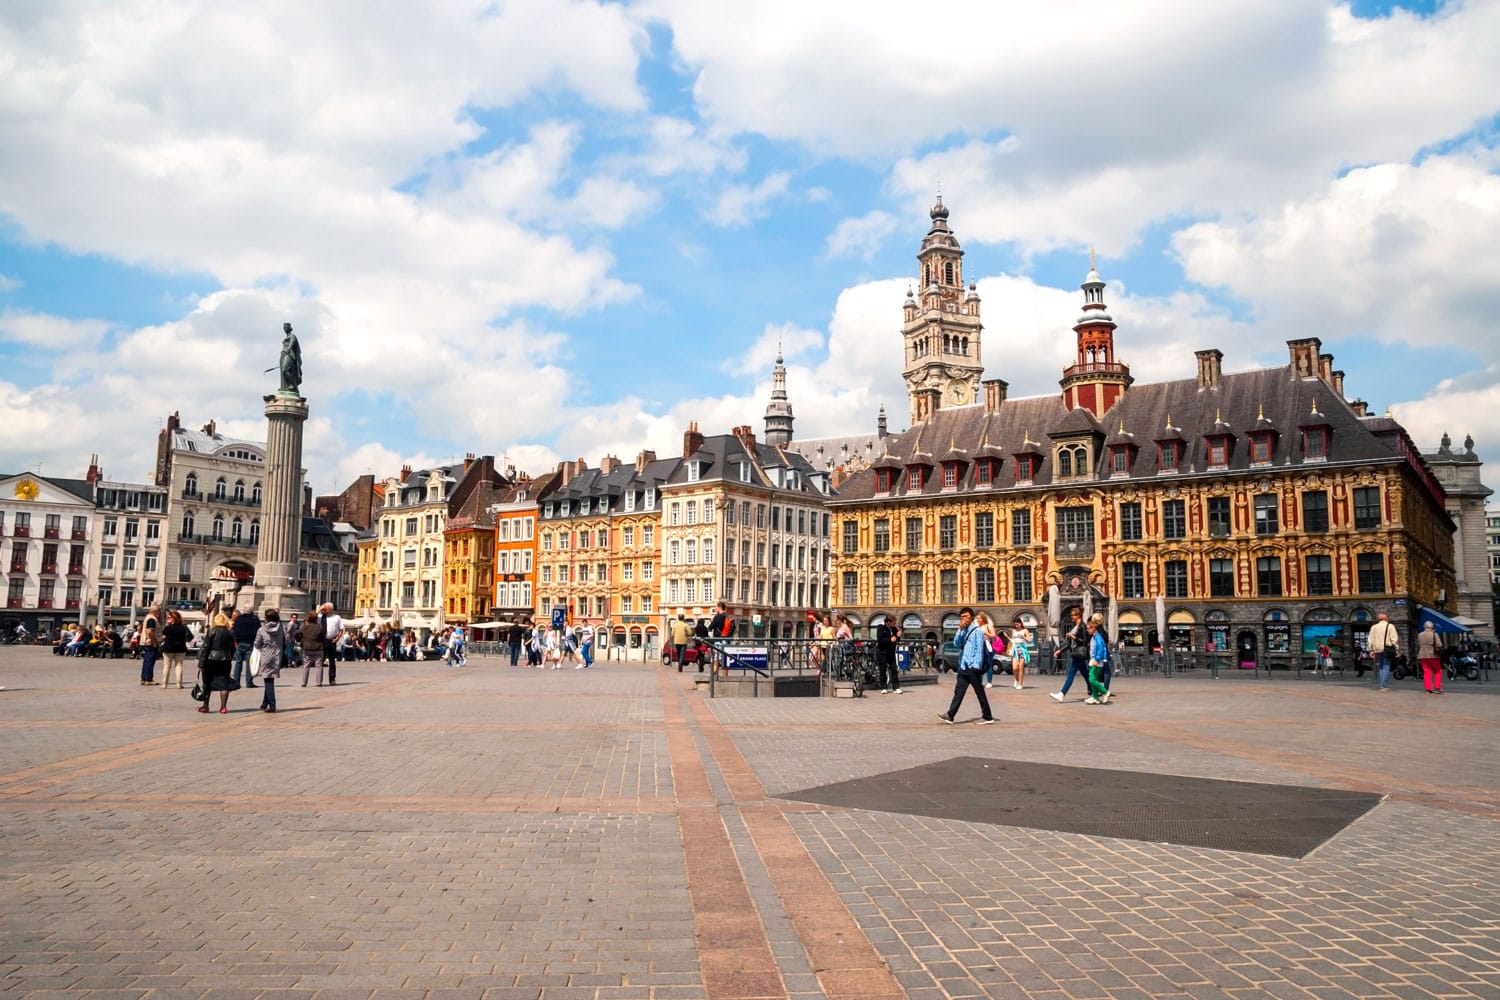 People passing Central town square, La Grand Place in Lille, France